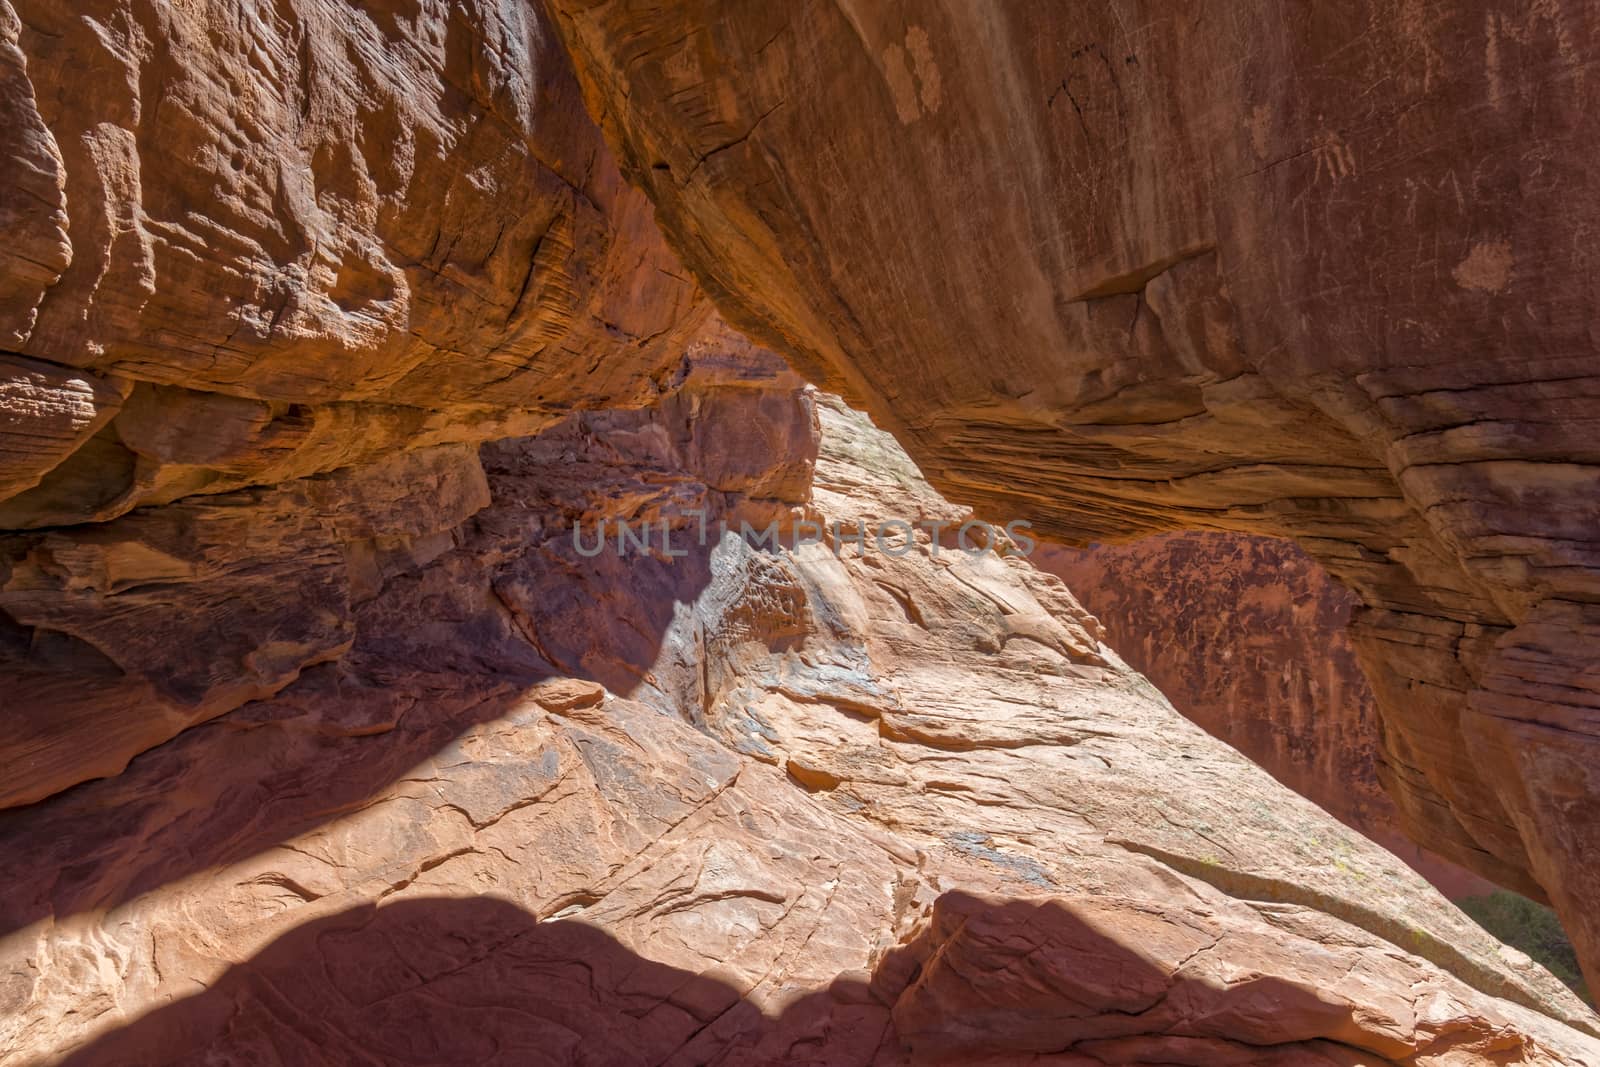 Another look inside Atlatl Rock by bkenney5@gmail.com